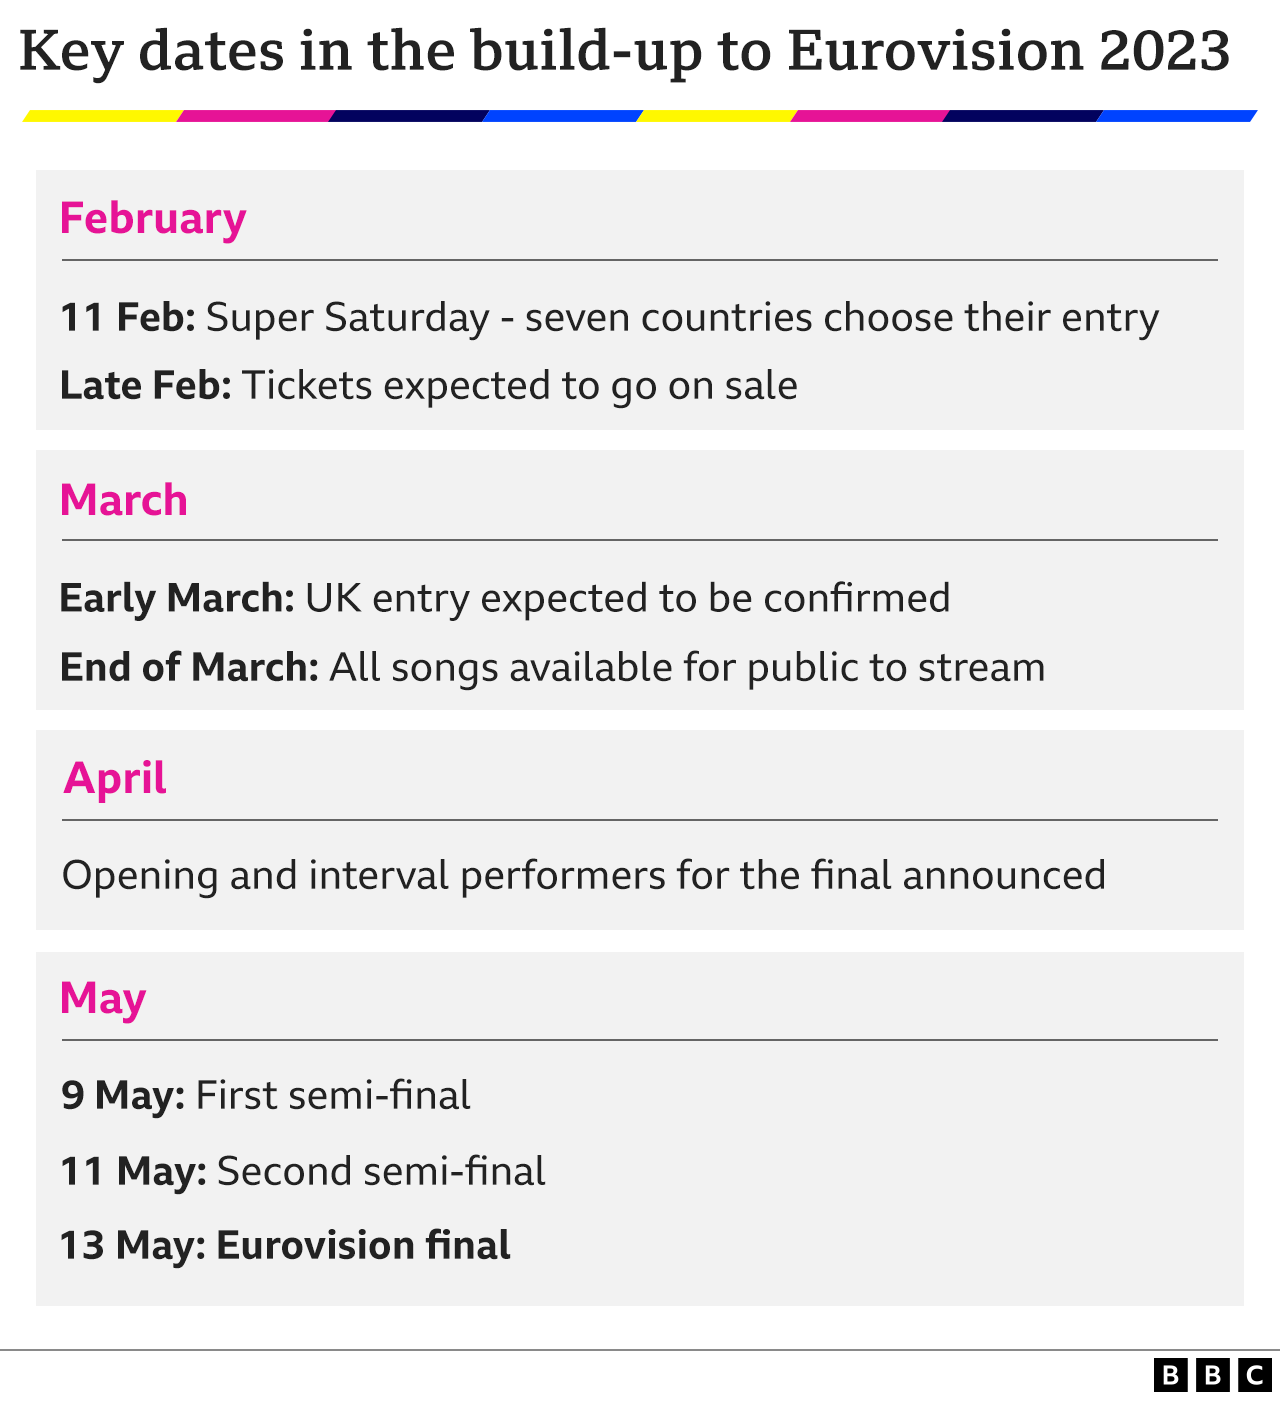 Table showing key dates in the build-up to Eurovision 2023. 11 February: Super Saturday - seven countries choose their entry. Late February: Tickets expected to go on sale. Early March: UK entry expected to be confirmed. End of March: All songs available for public to stream. April: Opening and interval performers for the final announced. 9 May: First semi-final. 11 May: Second semi-final. 13 May: Eurovision final.